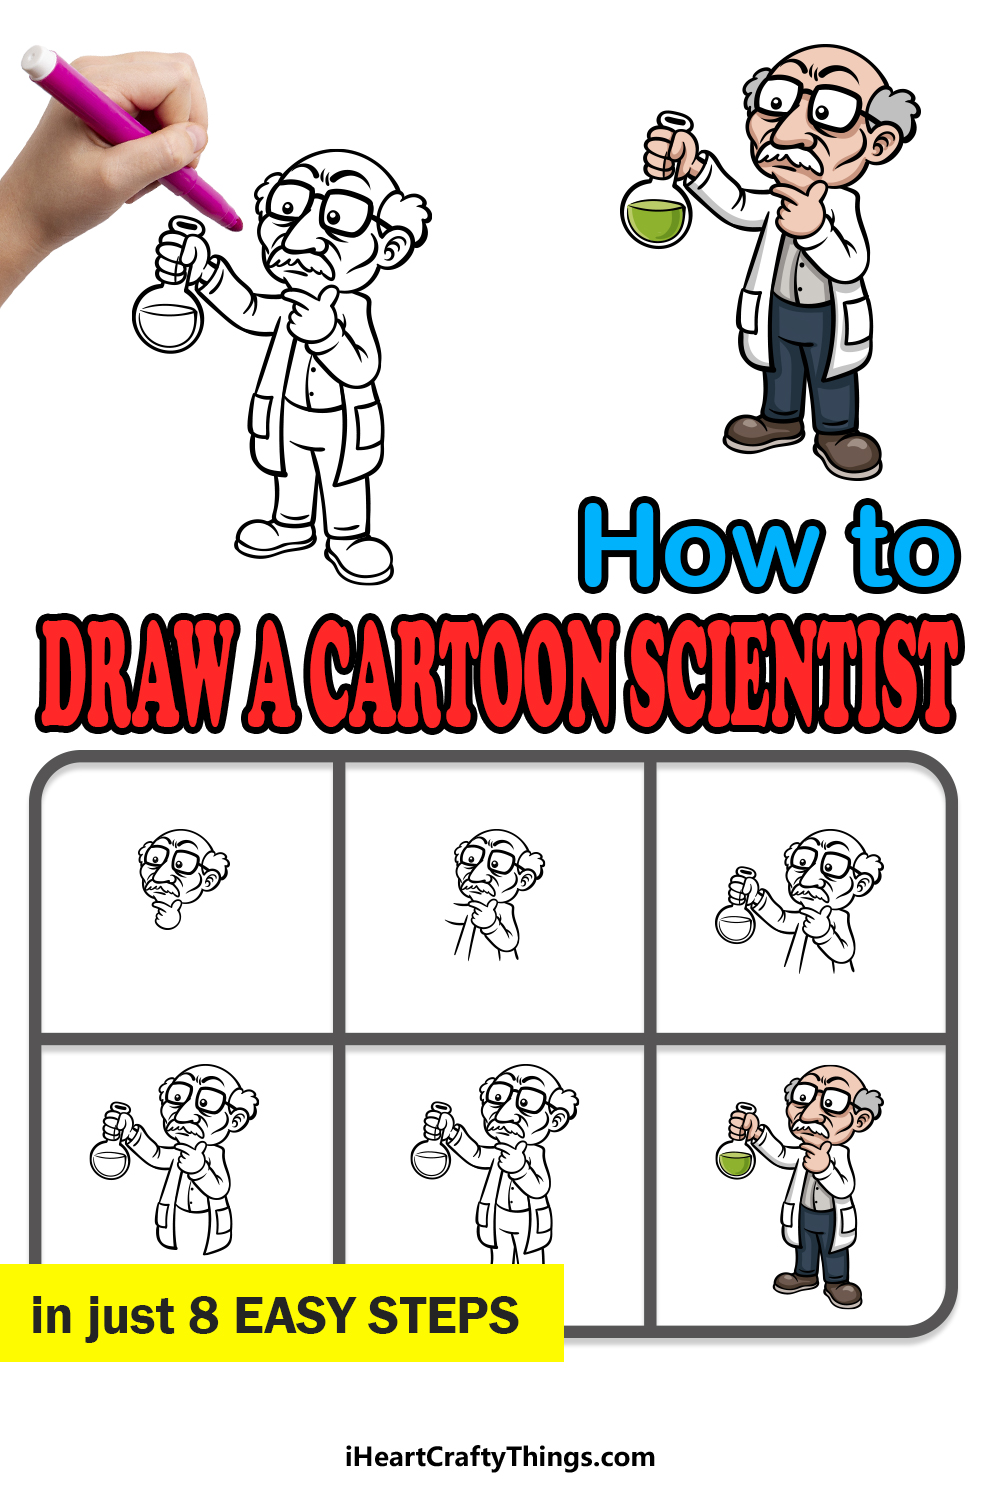 how to draw a cartoon scientist in 8 easy steps